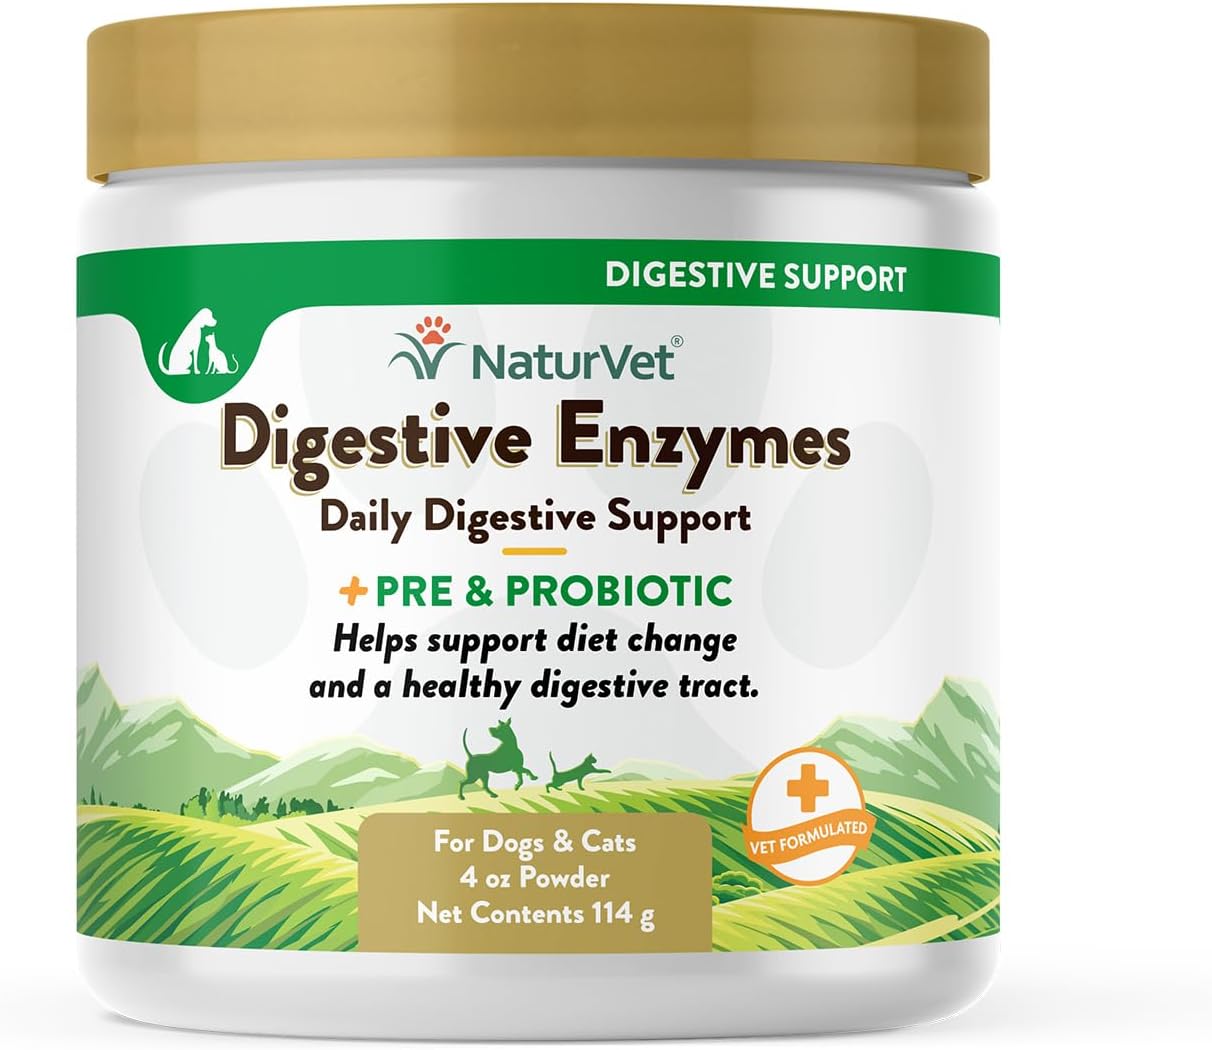 Naturvet Digestive Enzymes Powder with Pre & Probiotics for Dog and Cat - 4oz